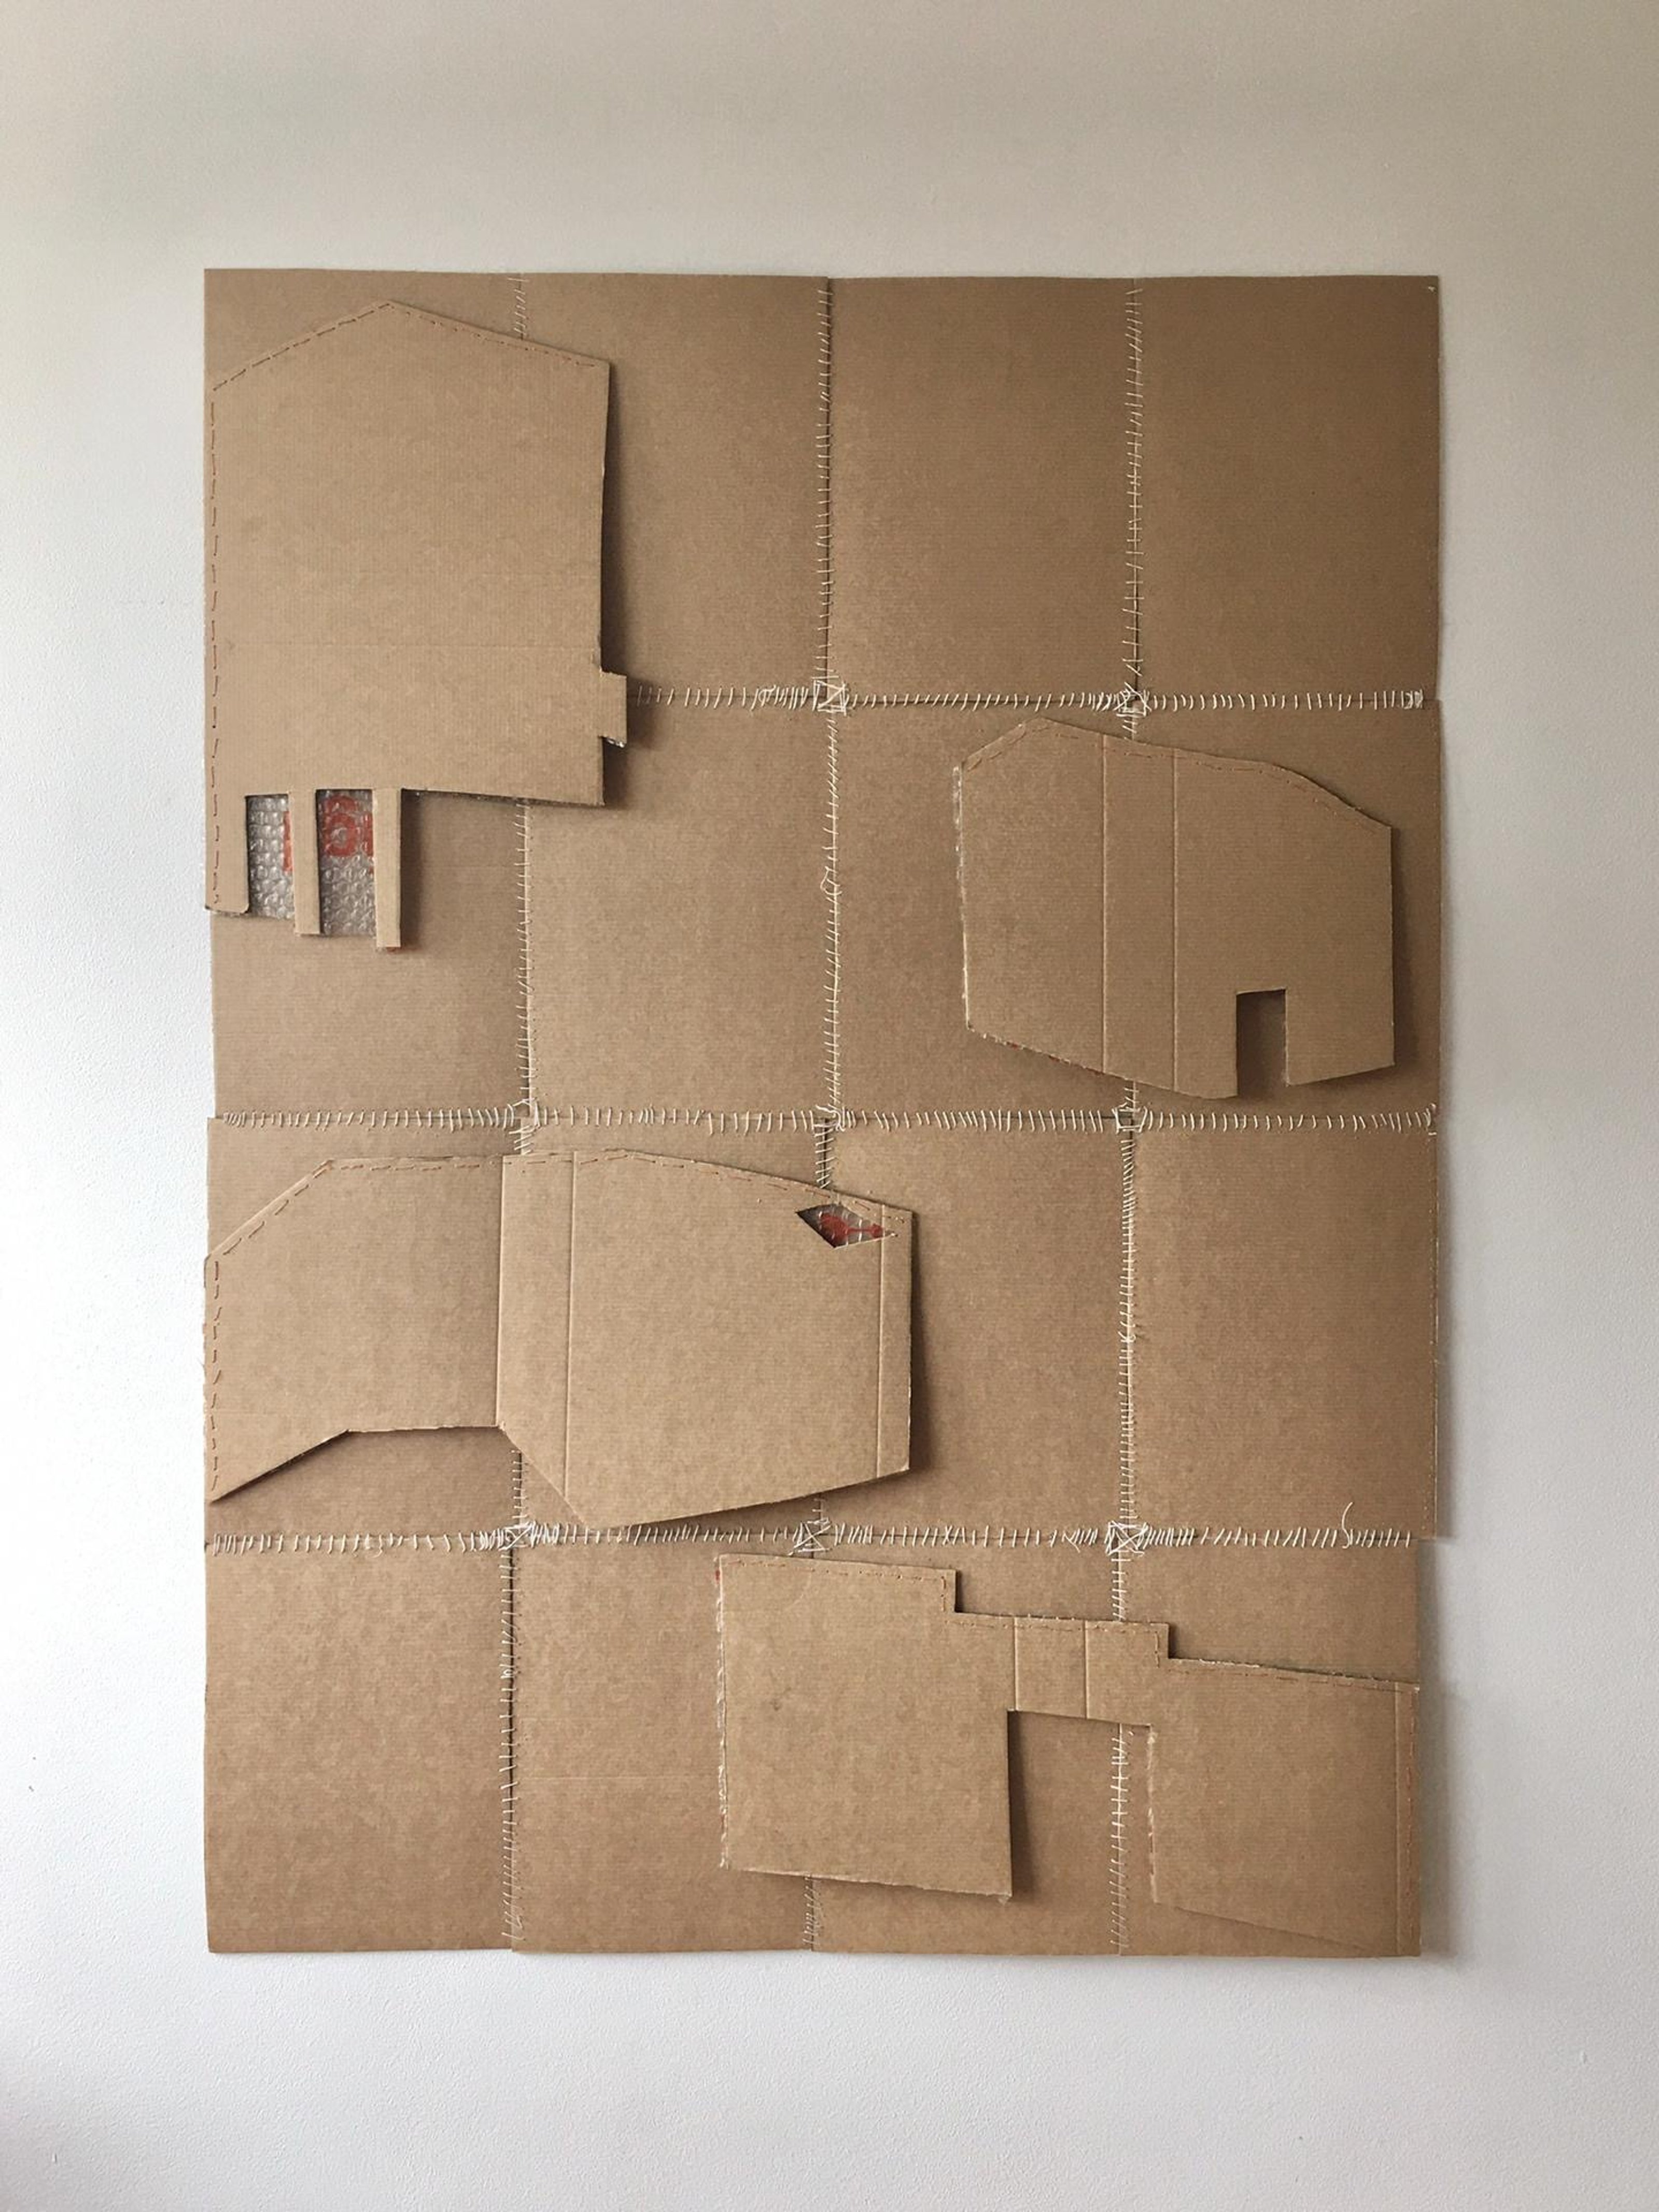 Cardboard box patchwork with cutout images of houses